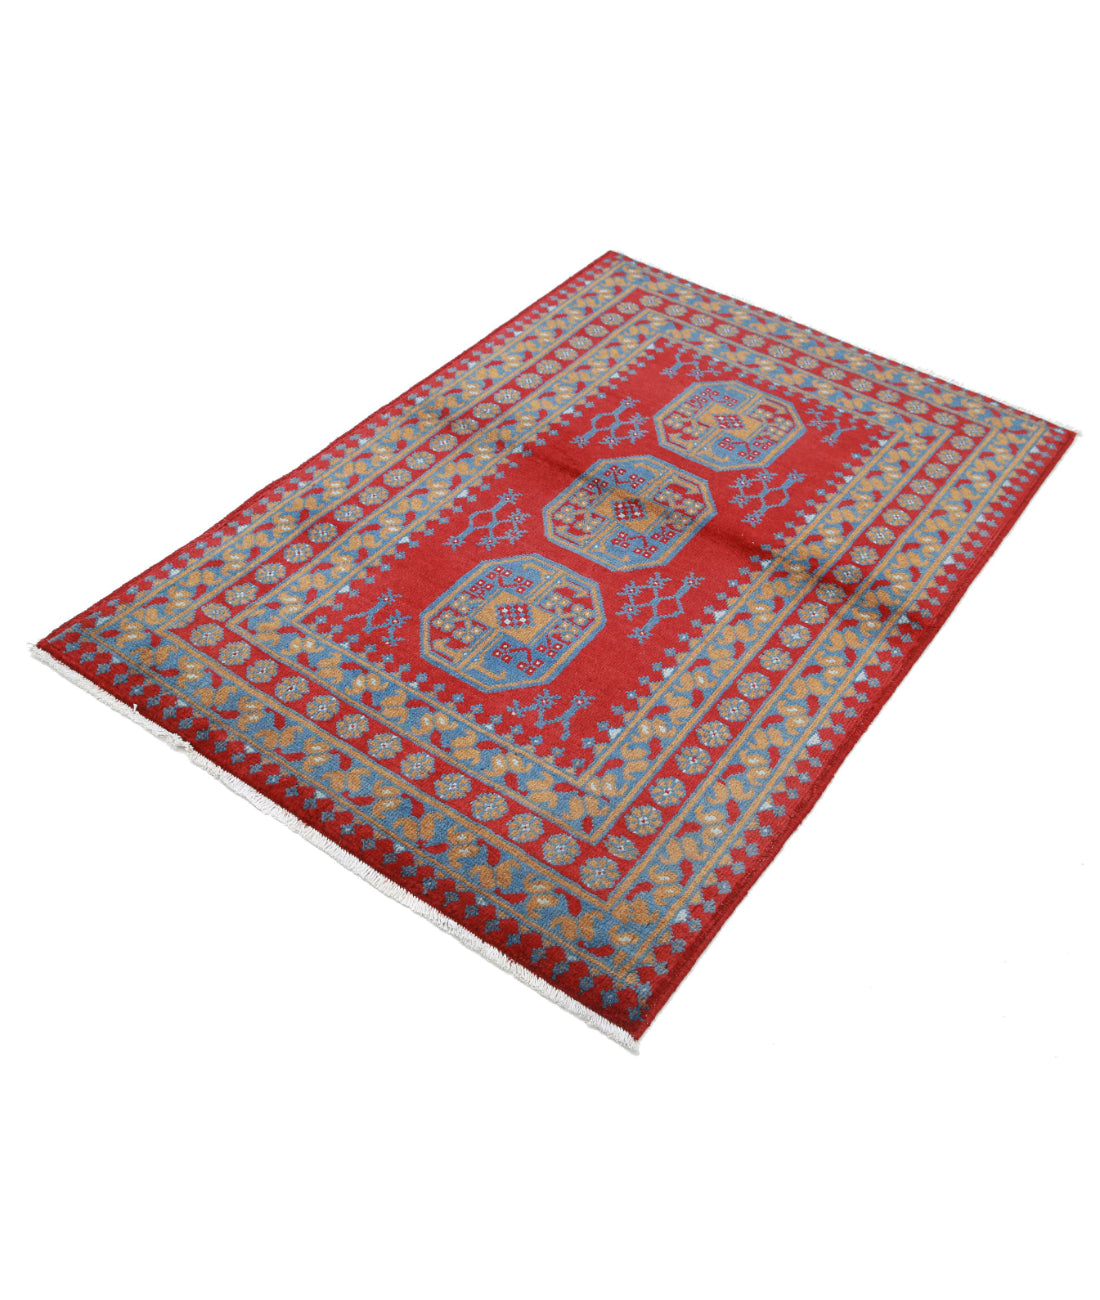 Revival 3'4'' X 4'9'' Hand-Knotted Wool Rug 3'4'' x 4'9'' (100 X 143) / Red / Blue